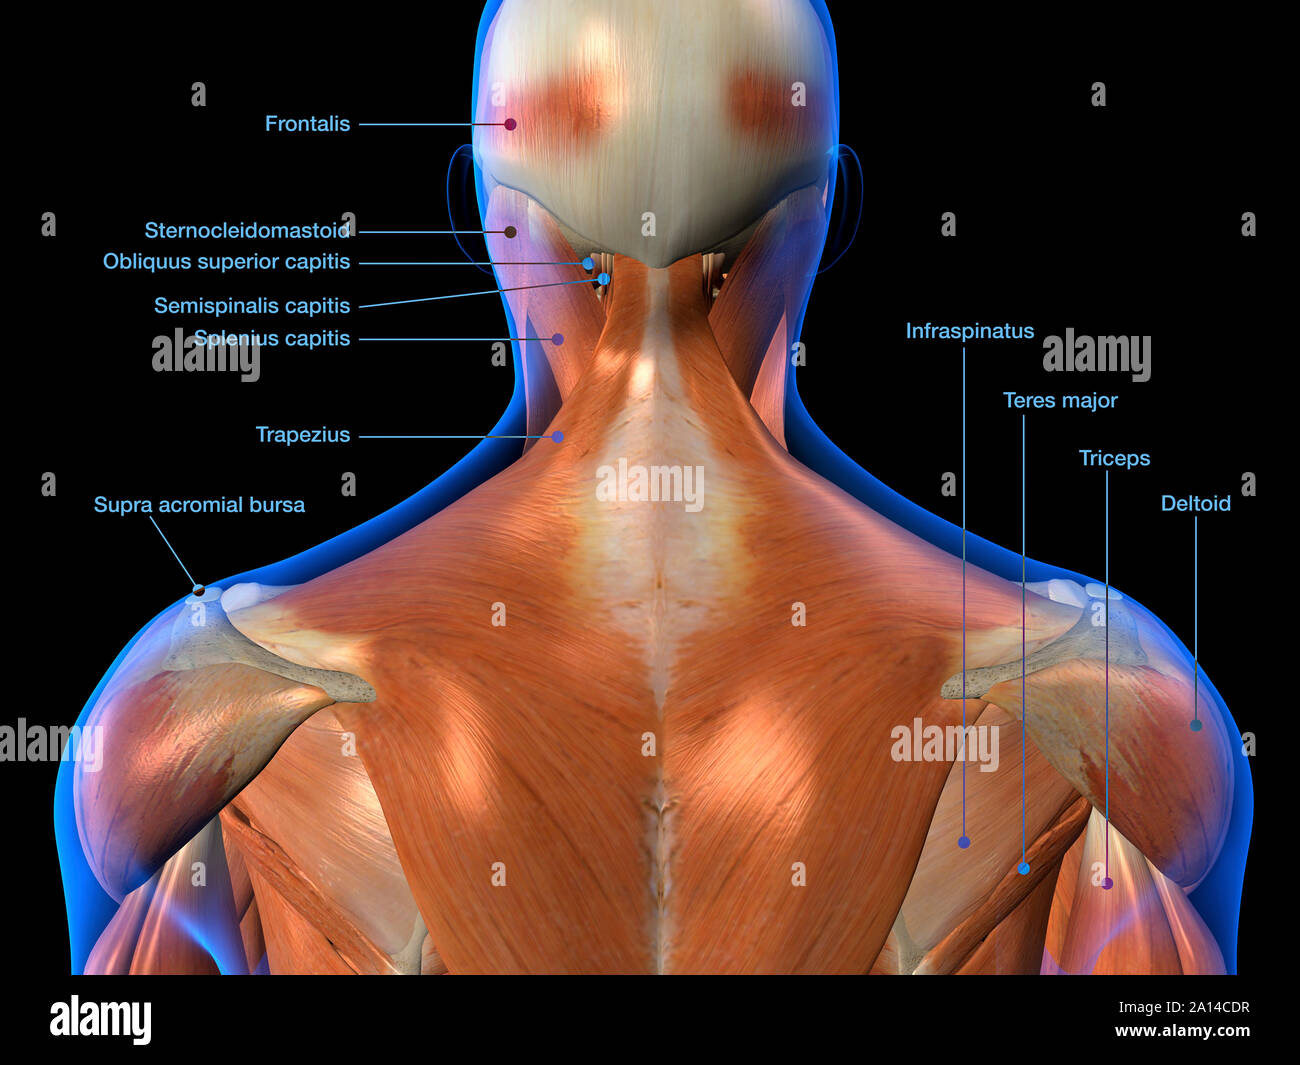 Labeled Anatomy Chart Of Neck And Back Muscles On Black Background